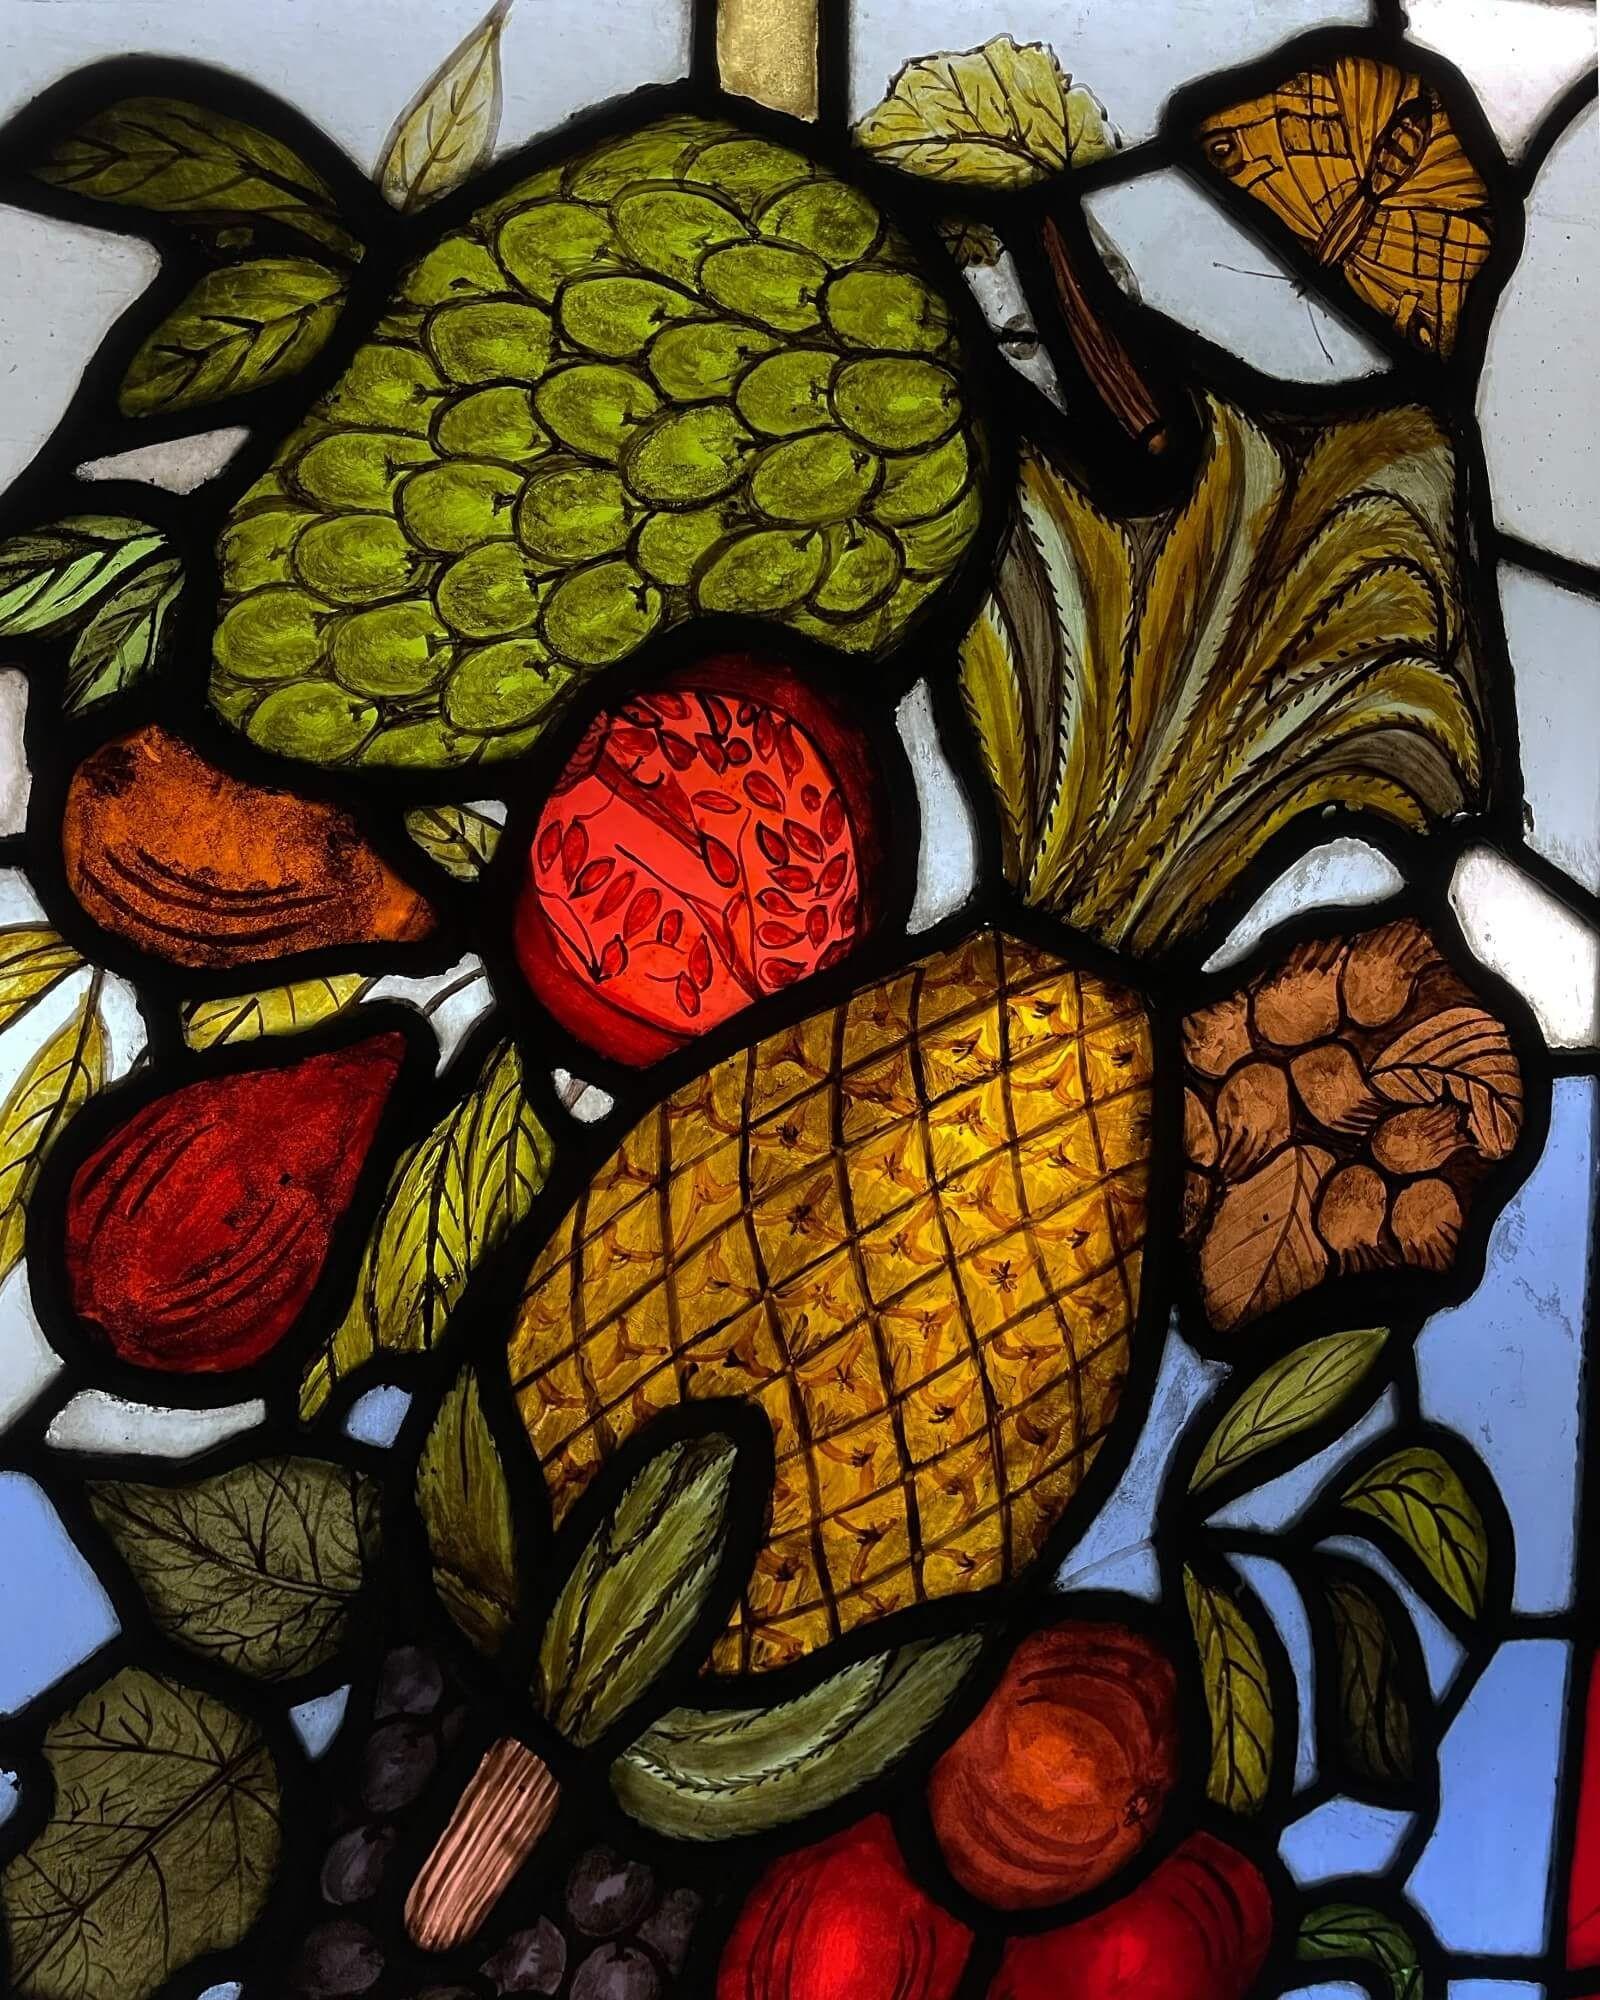 A beautiful pair of late 19th century antique English stained glass windows depicting an abundance of colourful fruits including pineapples, pomegranates, grapes and cherries alongside butterflies.

With slight variances in the design, these